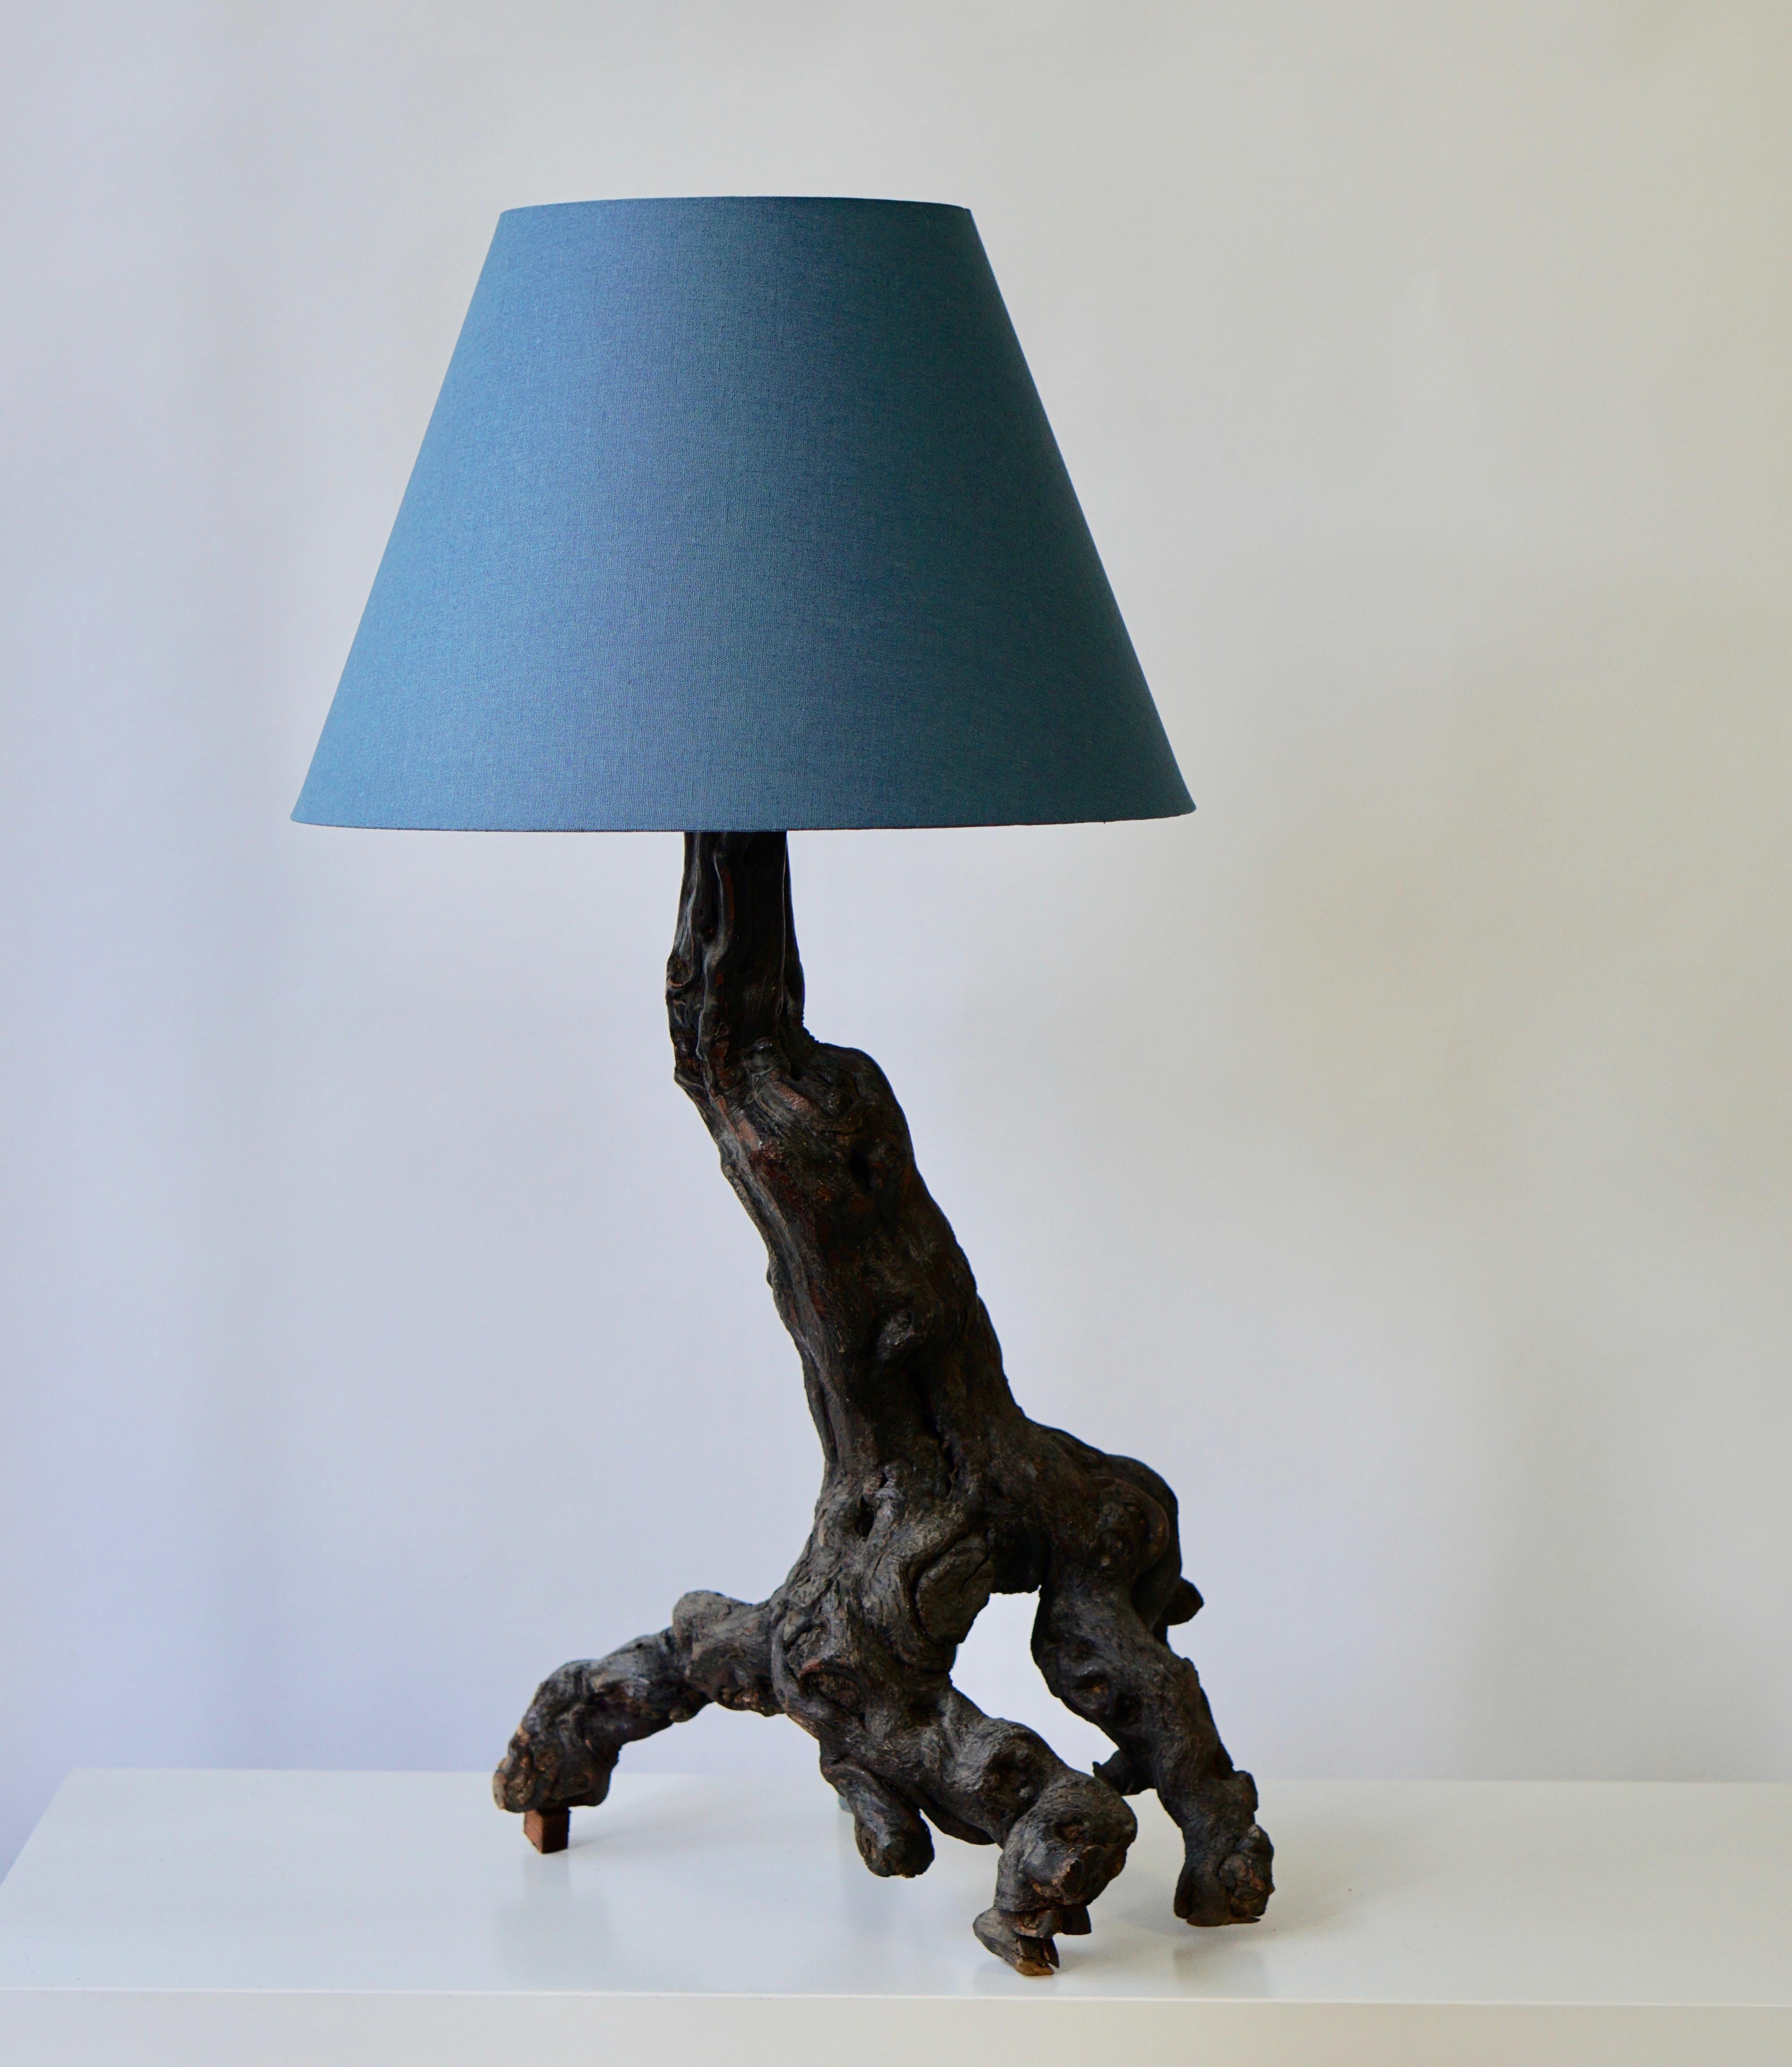 Lovely Mid-Century Modern sculptural burl wood table lamp.
Measures: Height with socket 64 cm.
Width 40 cm.
Depth 30 cm.
Lamp shades are not included in the price.